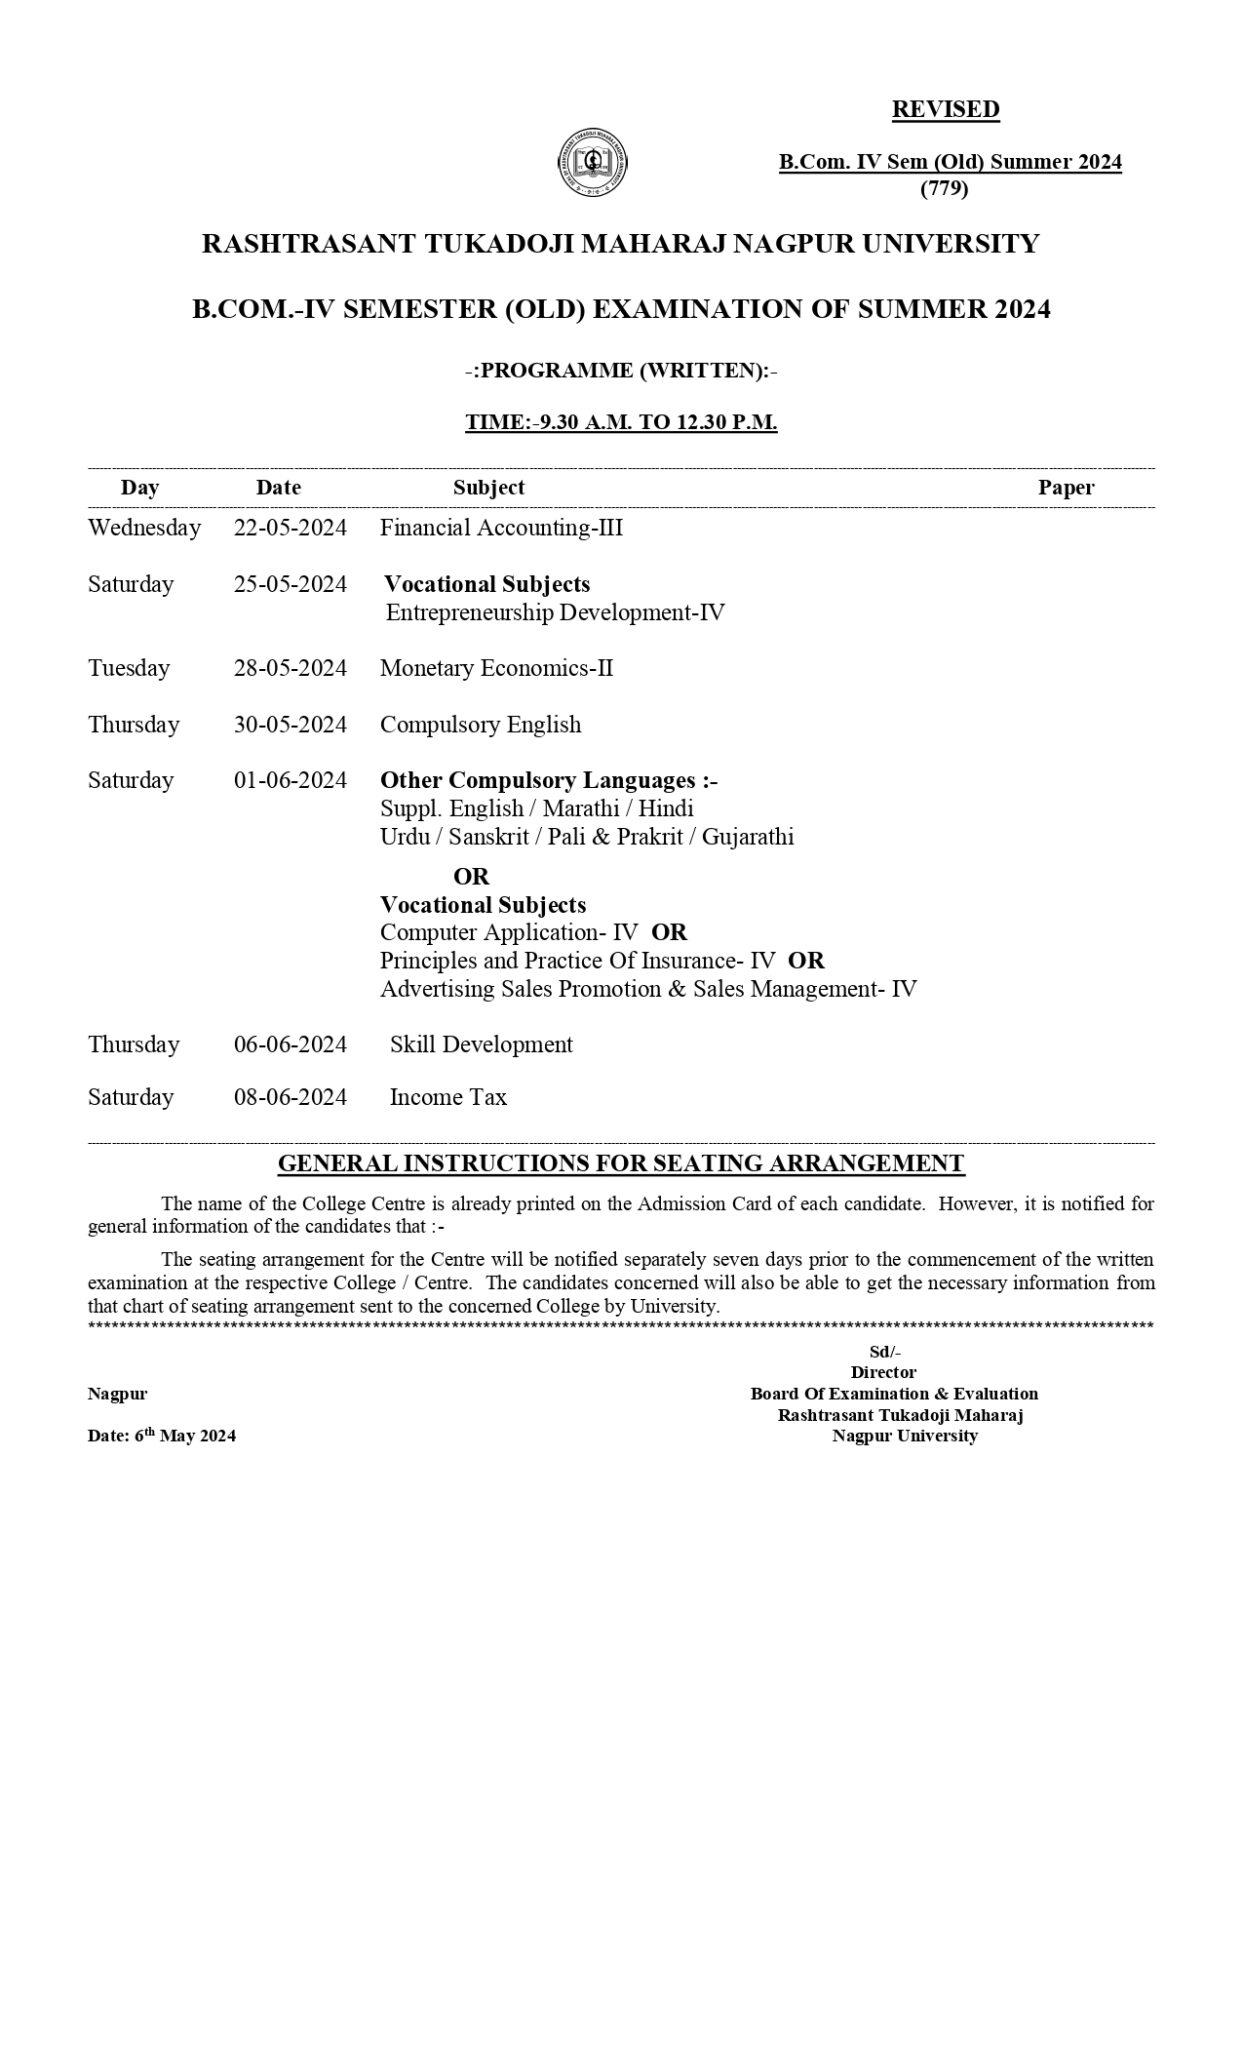 RTMNU 4th Sem Time Table Summer 2024 Revised